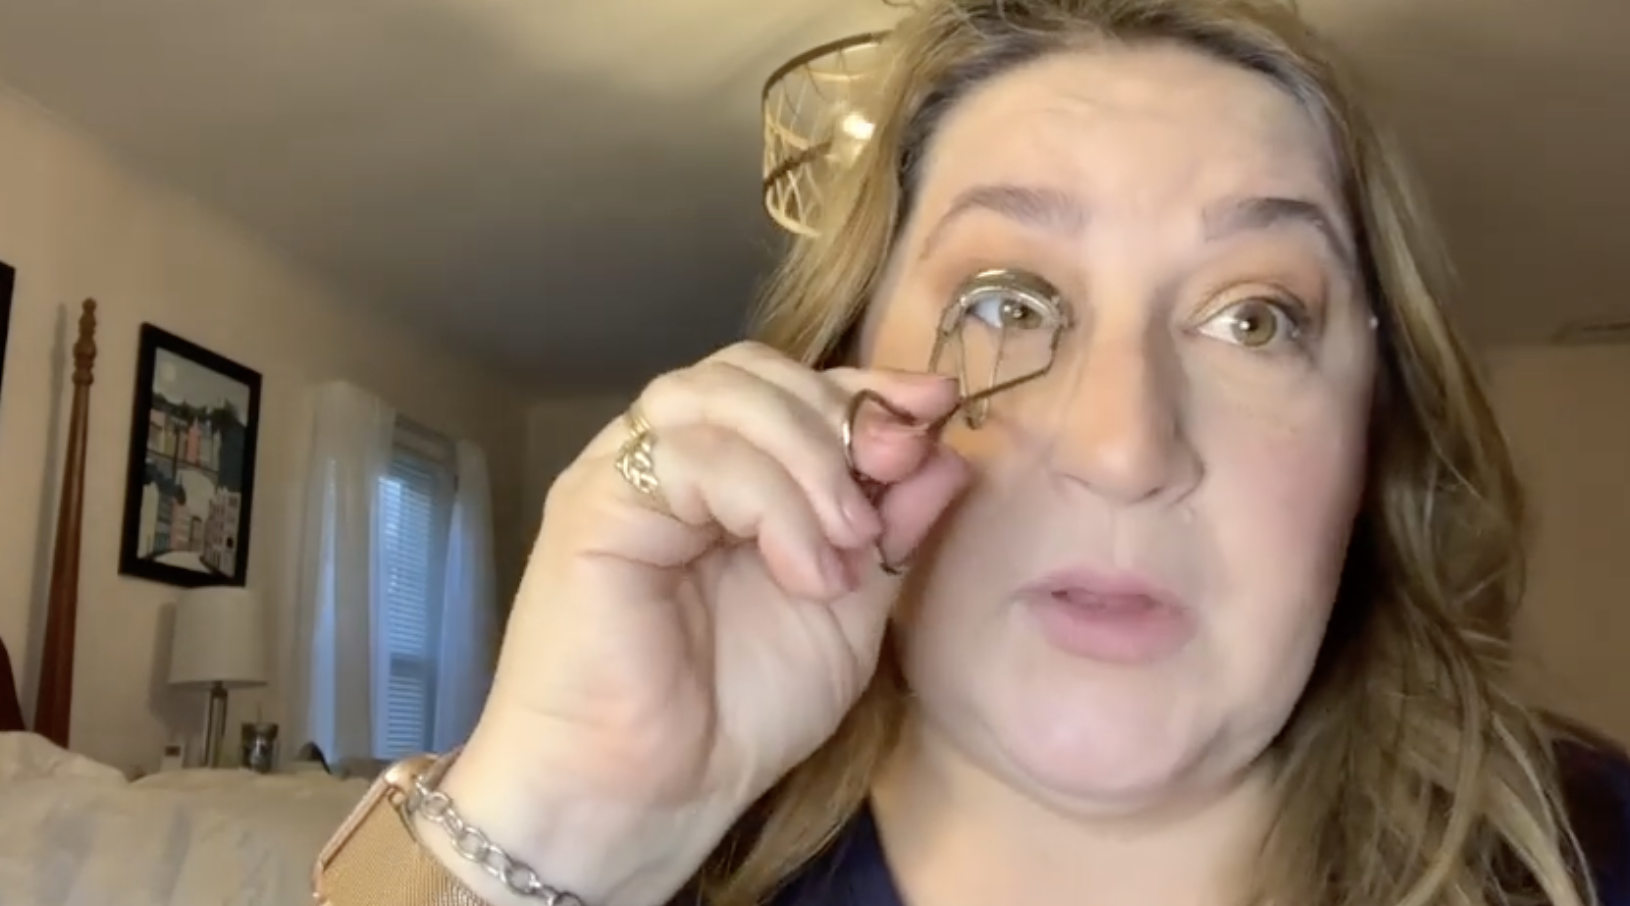 <p>If you want to see how I use the make up I take on vacation, here is a link to a tutorial and I show the actual things I have packed in my travel makeup.</p><p><a href="https://www.youtube.com/watch?v=Q4ZZ_e2TKx4">Tutorial Number 1</a></p><p><a href="https://www.youtube.com/watch?v=Q4ZZ_e2TKx4">Tutorial Number 2</a></p>